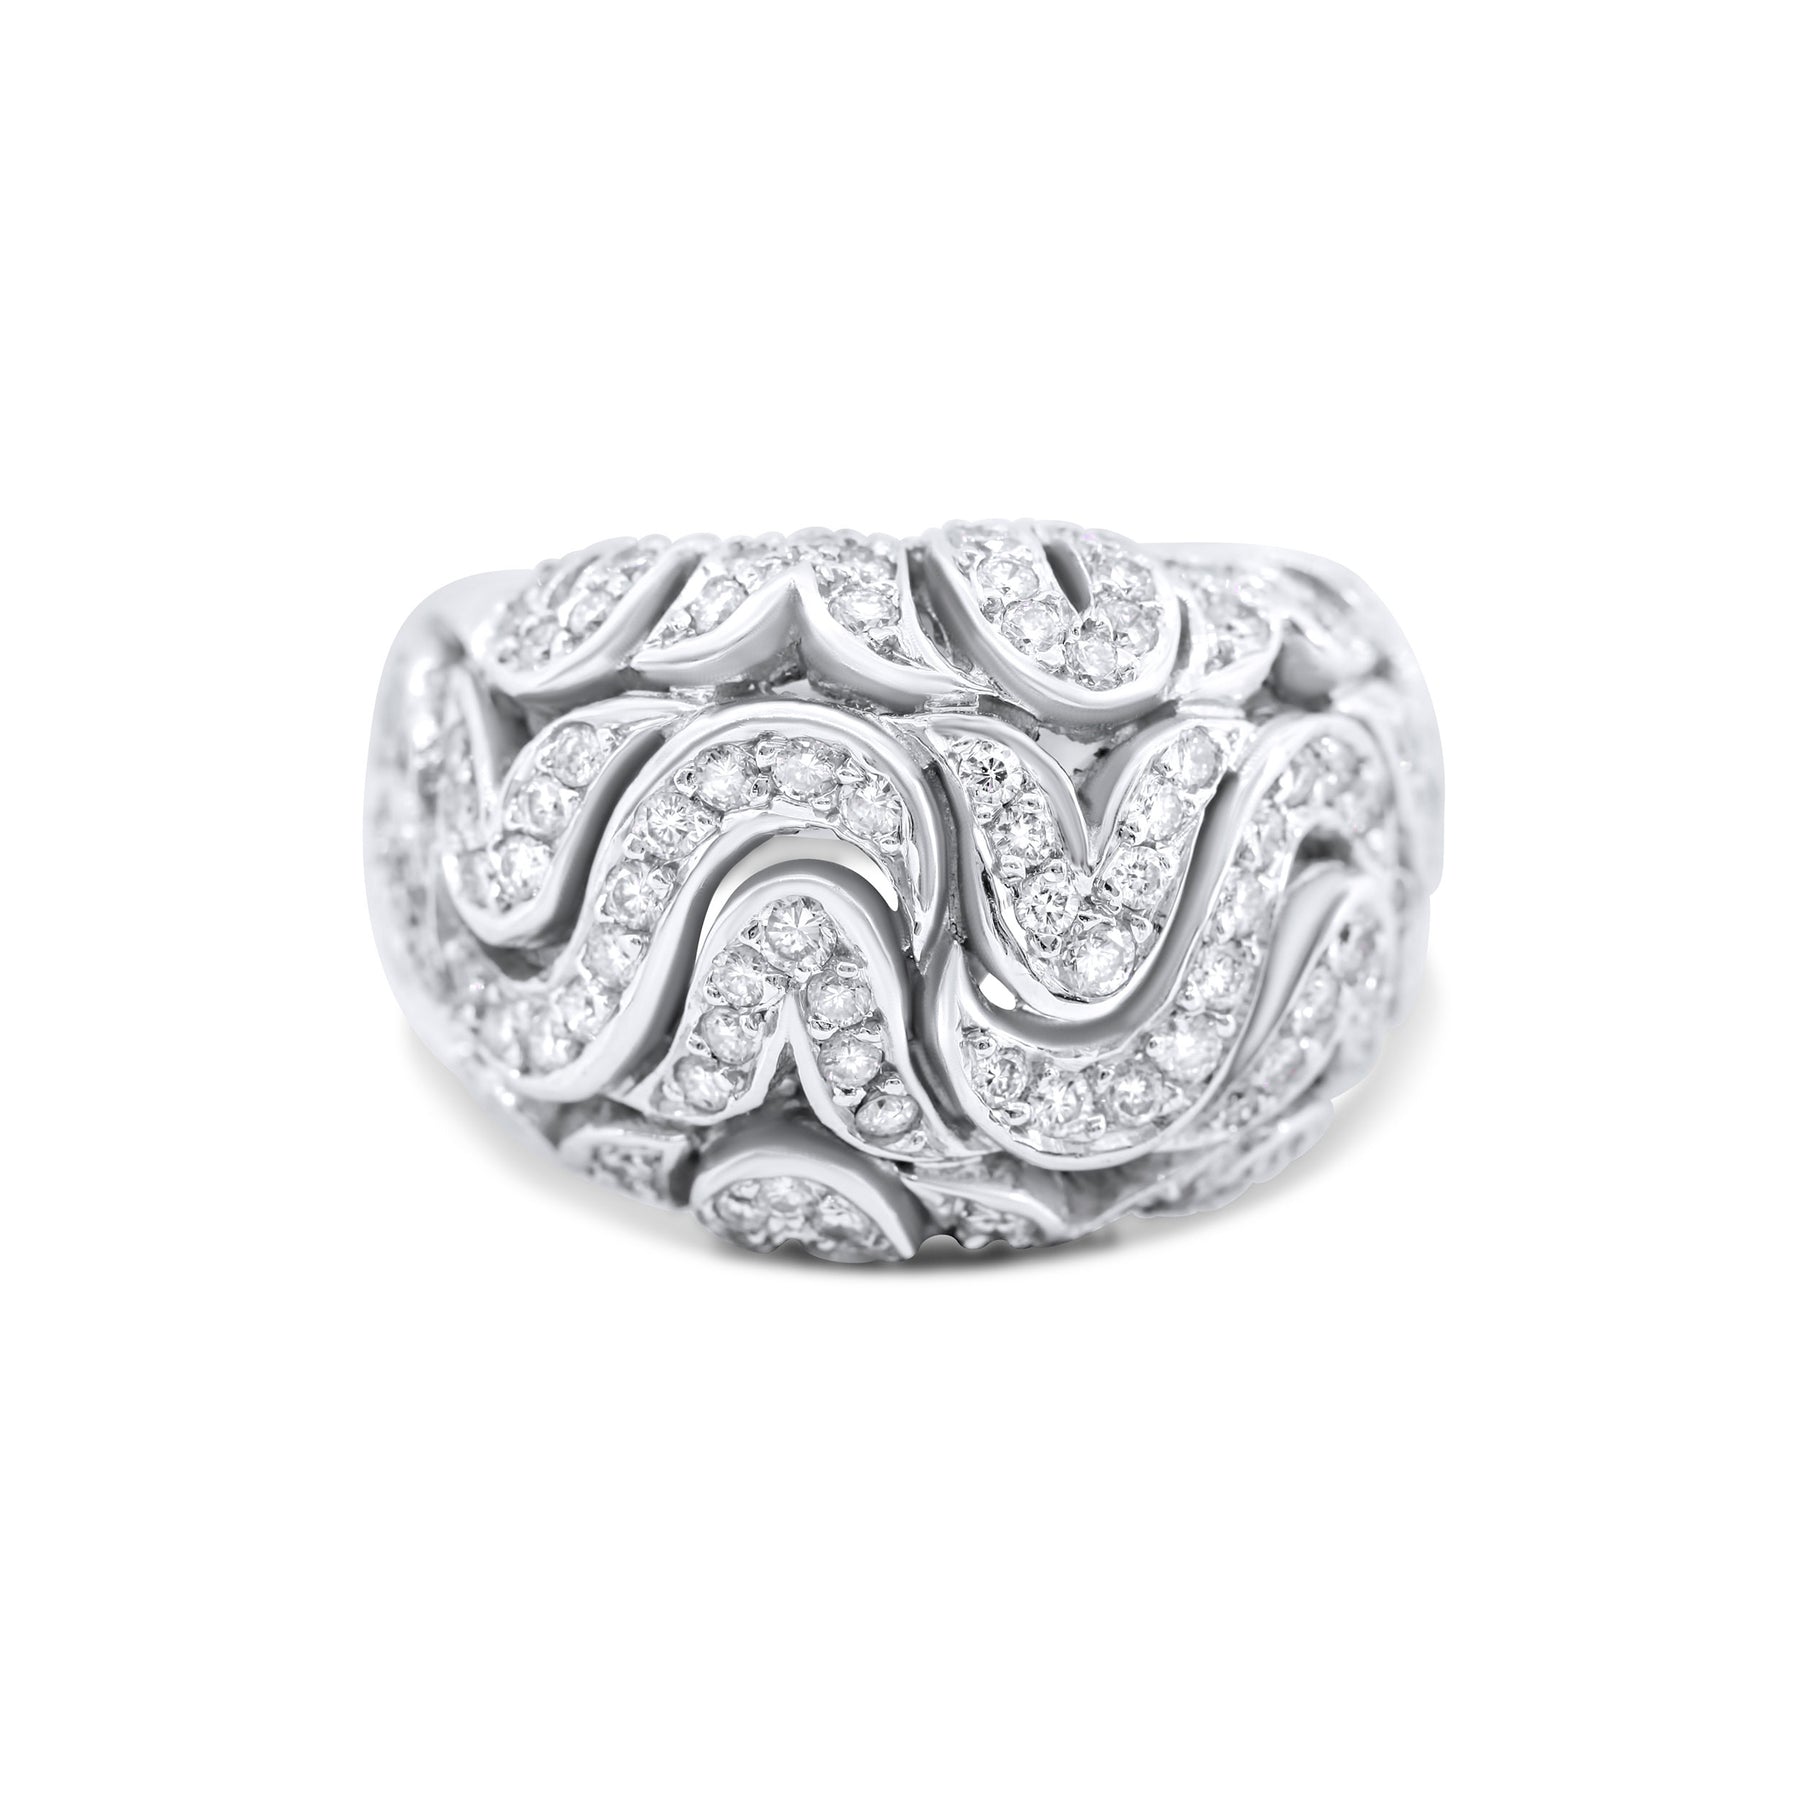 Wavy Cocktail Ring